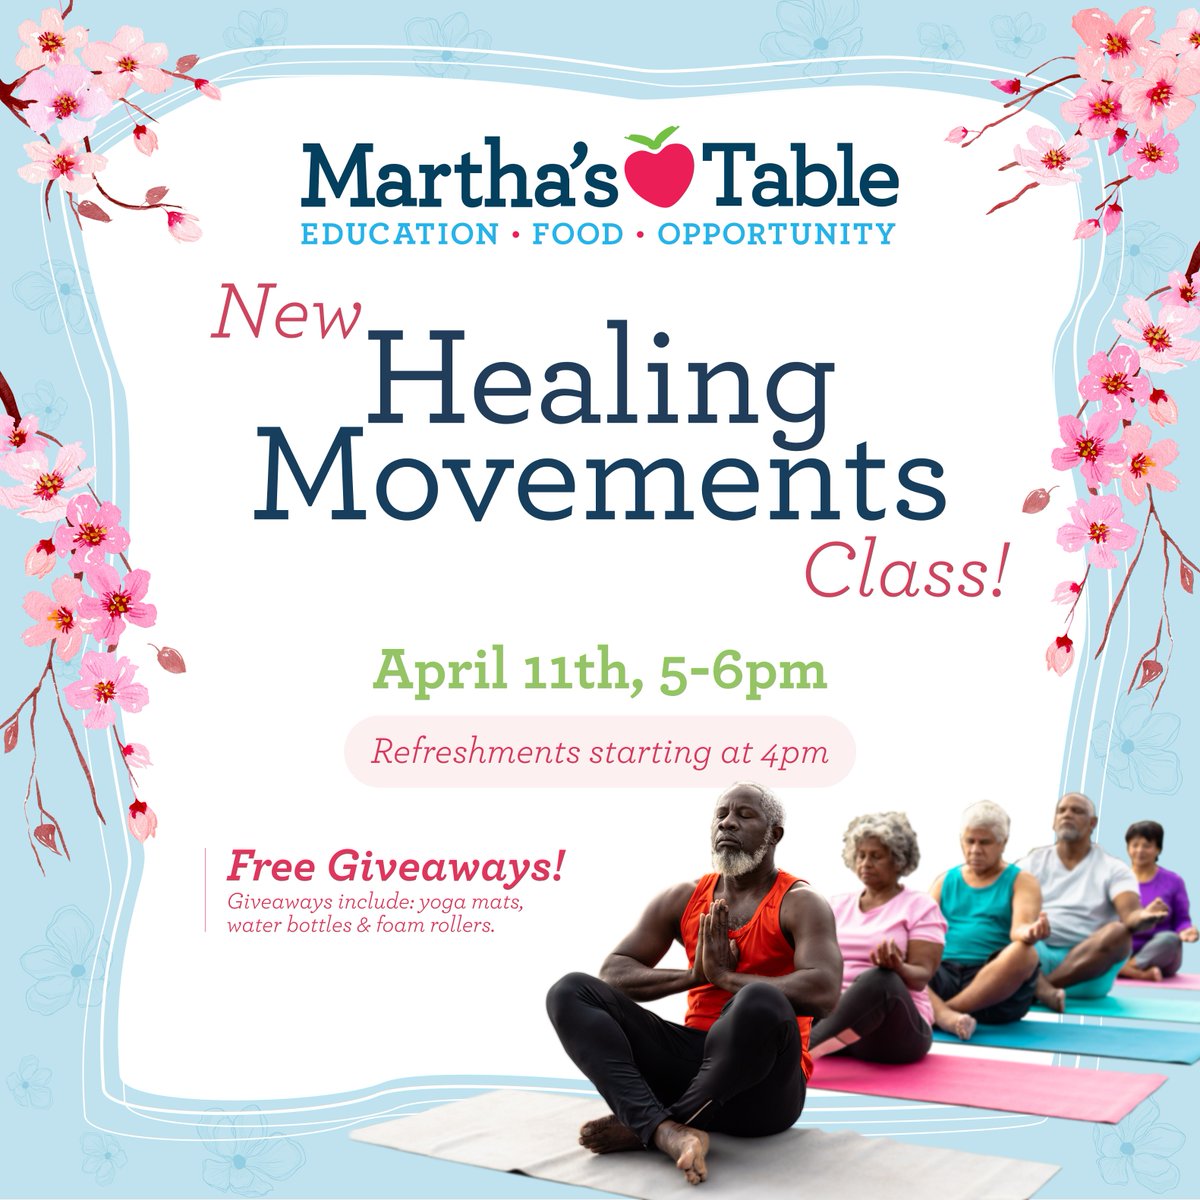 This Spring, we are living life in full bloom!🌸 🌸 Join us this April 11th for a newly developed Emotional Wellness program; Healing Movements!🌷 Register today to participate in this new wellness program! shorturl.at/juz48 #healthiswealth #wellness